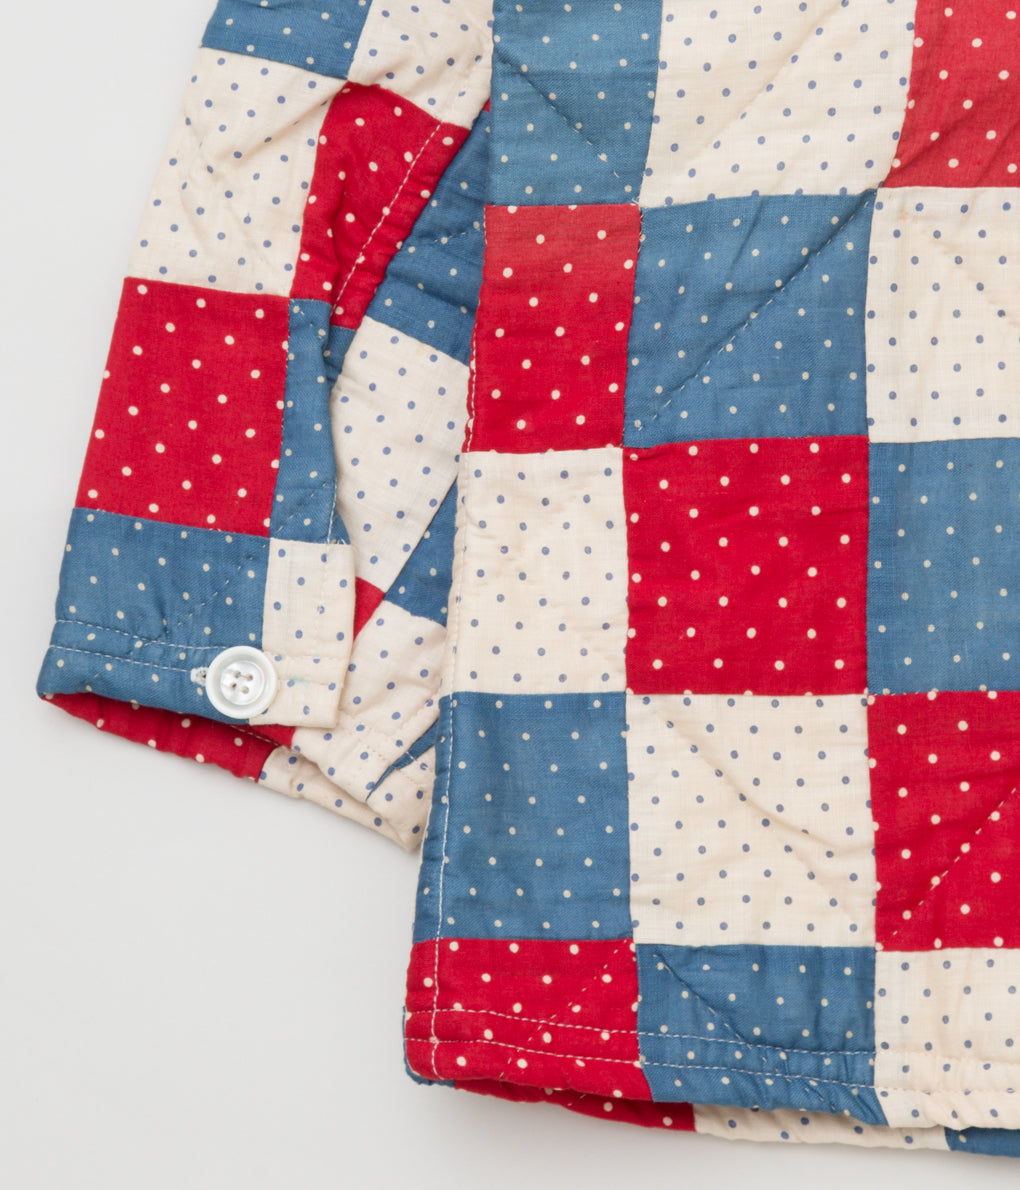 FAREWELL FRANCES "CLAUDE QUILTED COAT"(RED/BLUE MULTI)